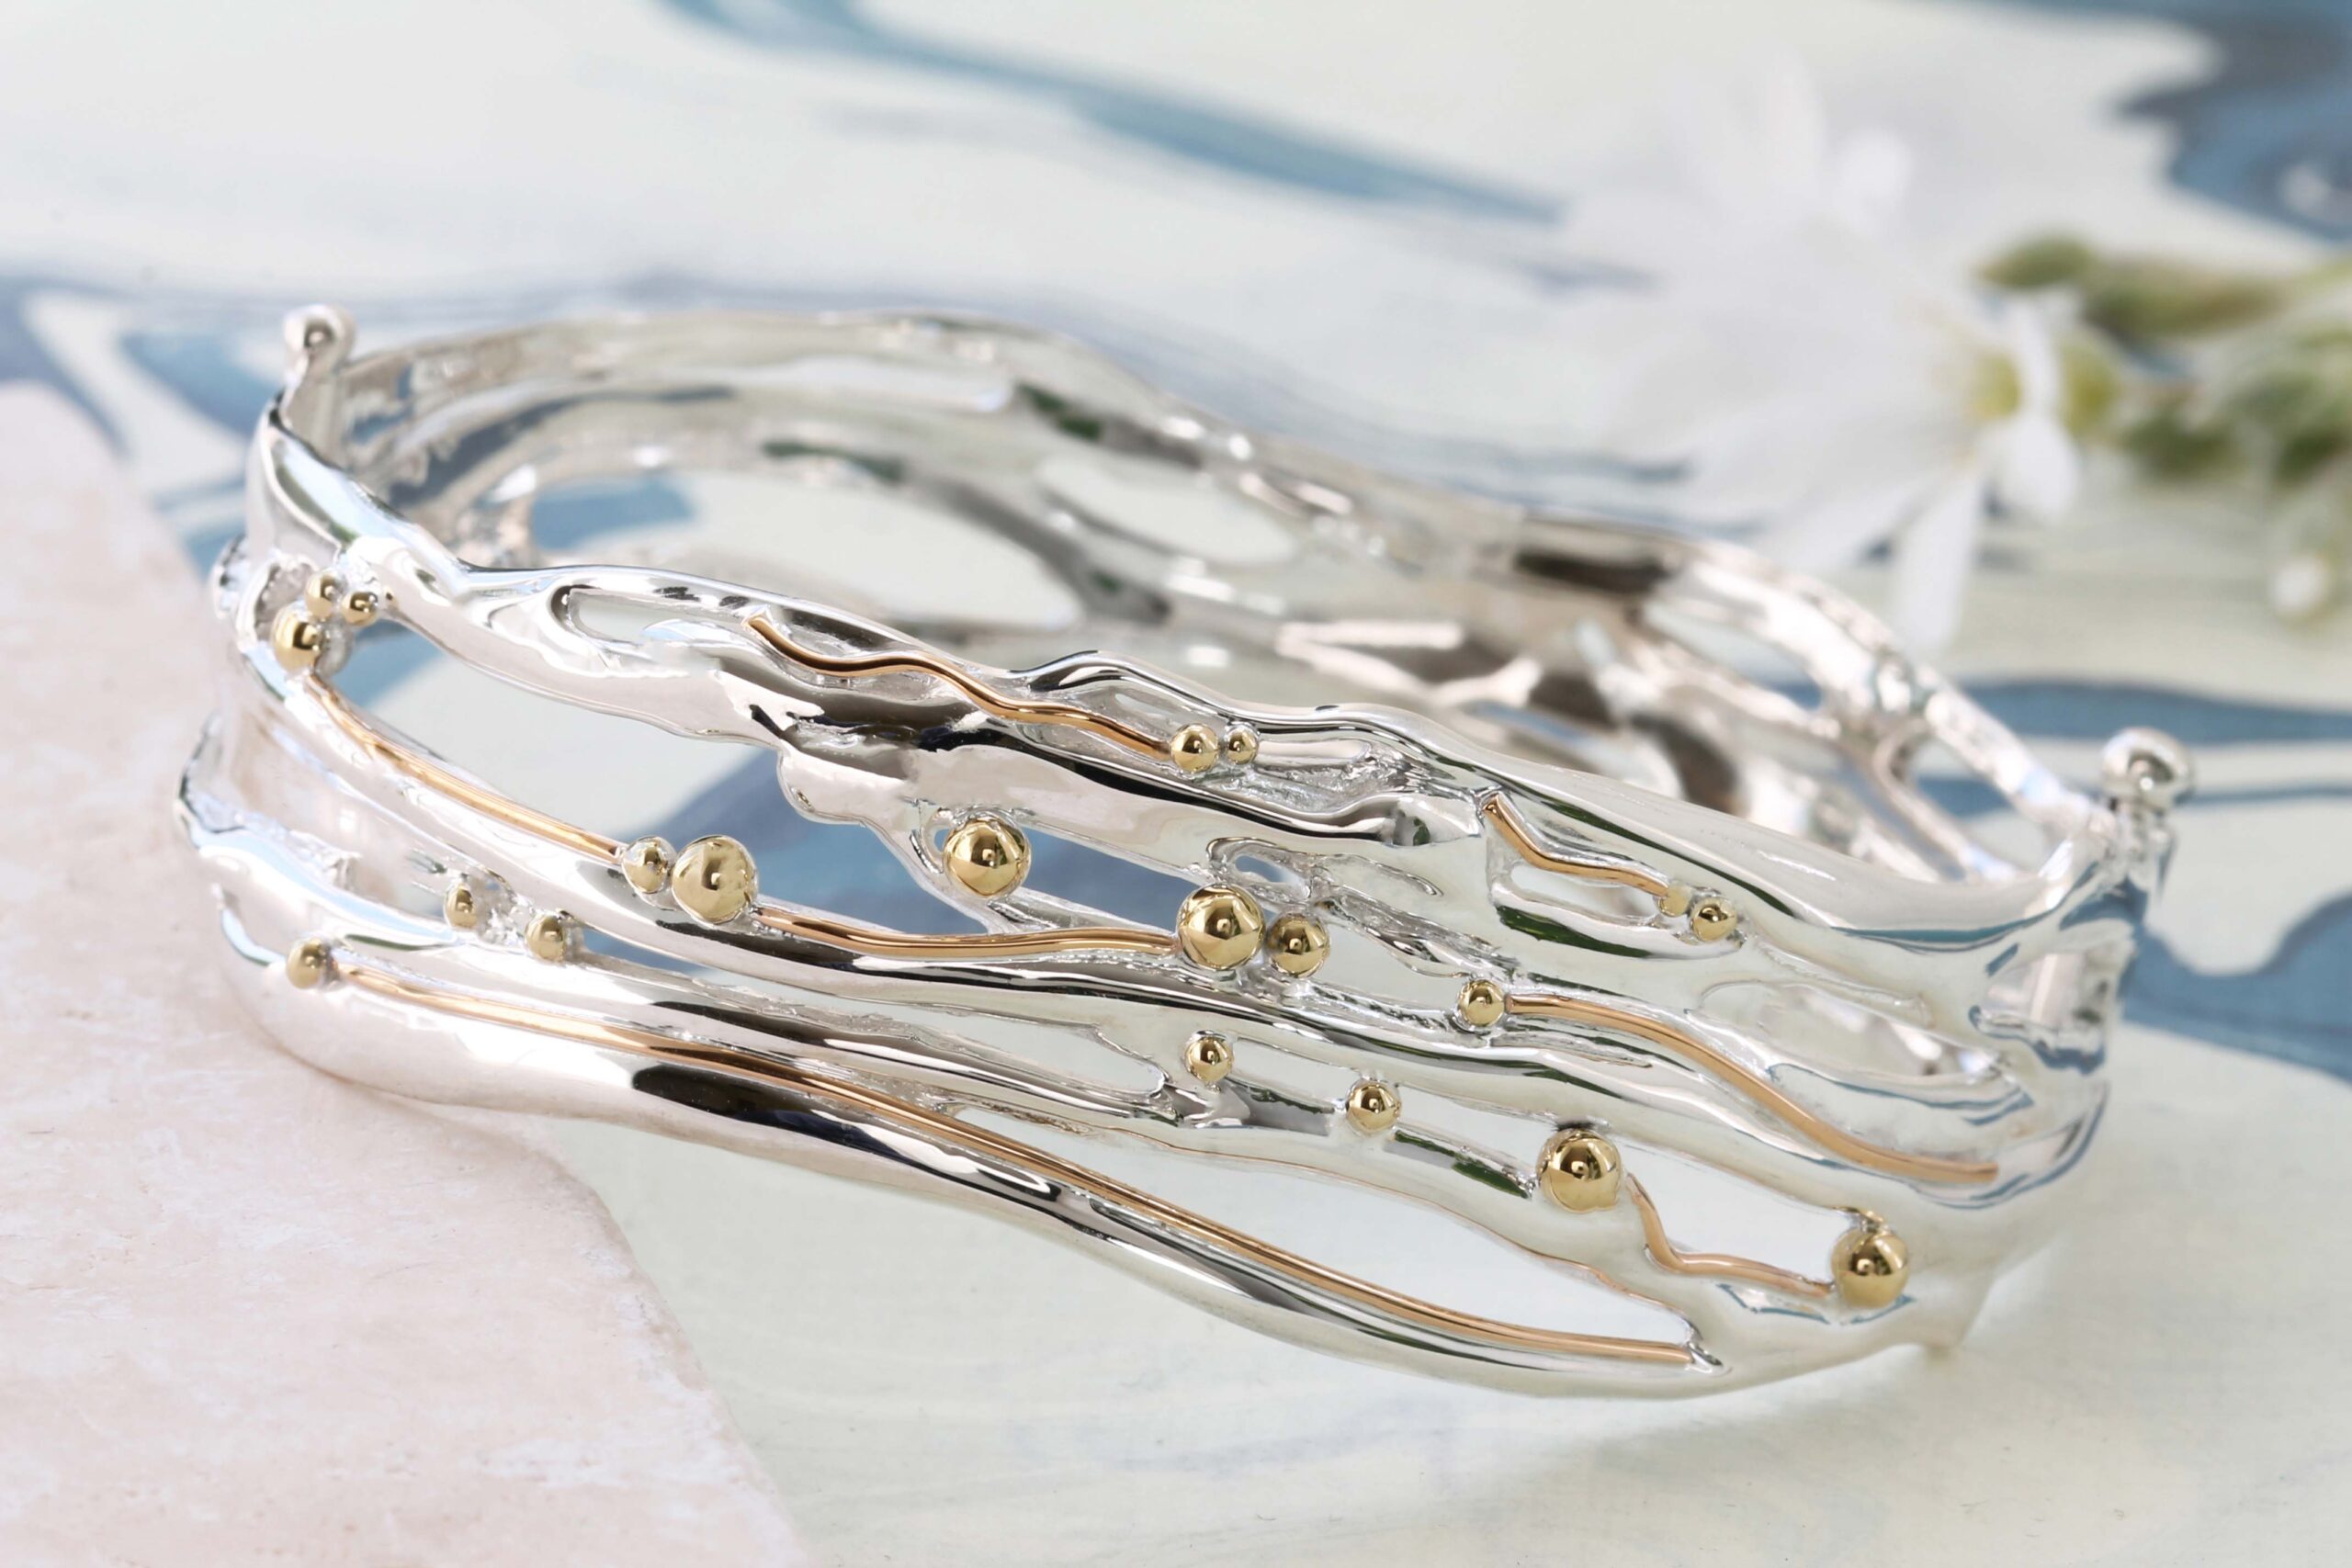 A Banyan Jewellery sterling silver organic waves bangle with delicate gold details